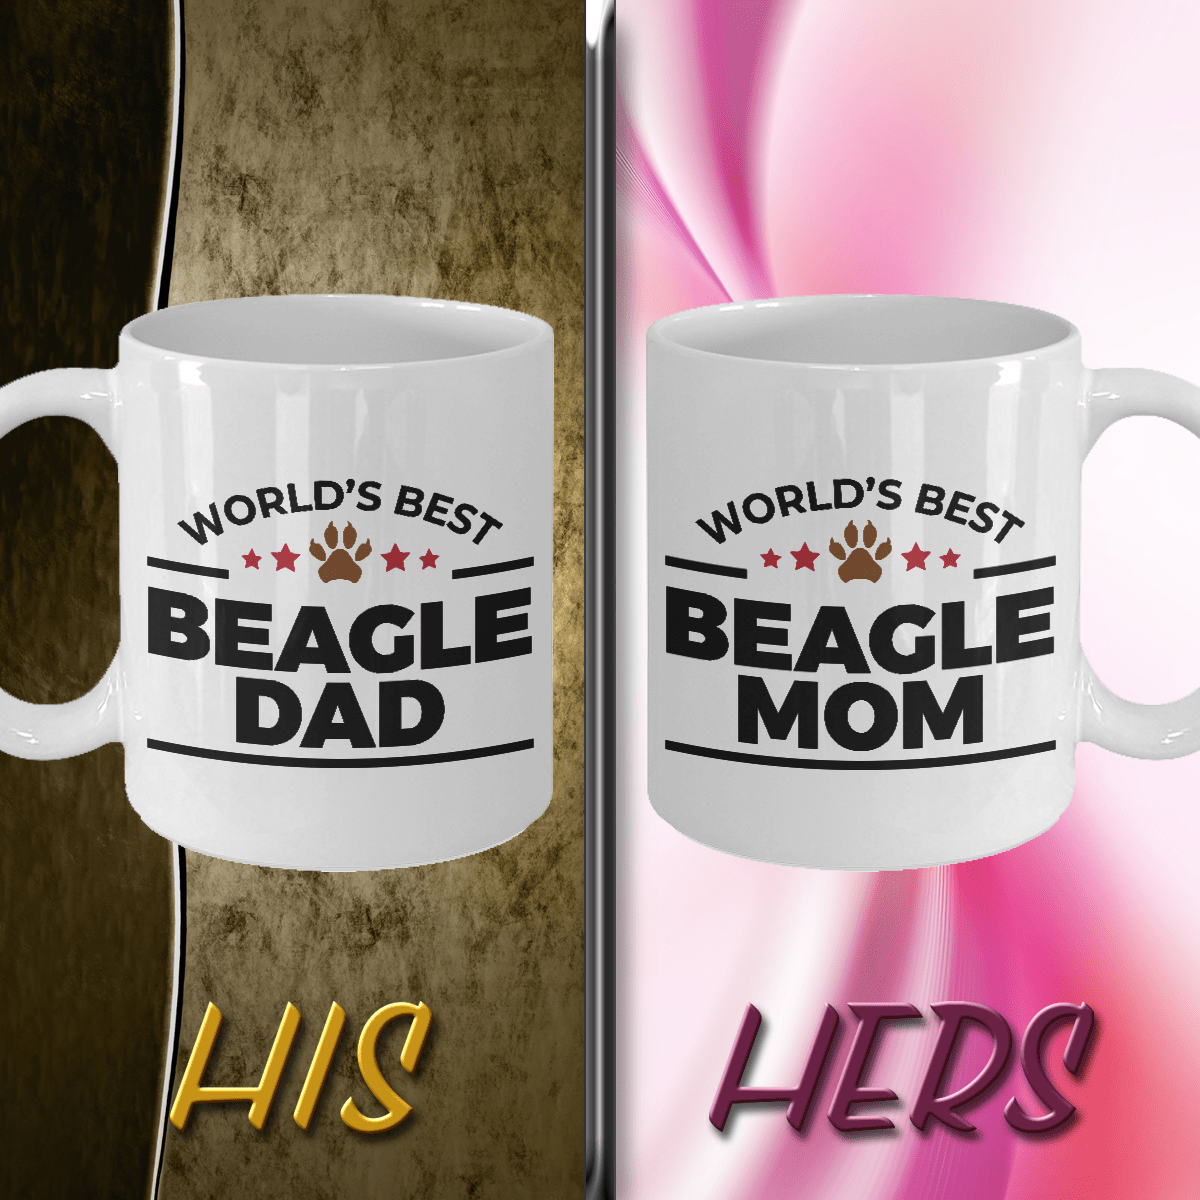 World's Best Beagle Dad and Mom Couple Ceramic Mug - Set of 2 His and Hers